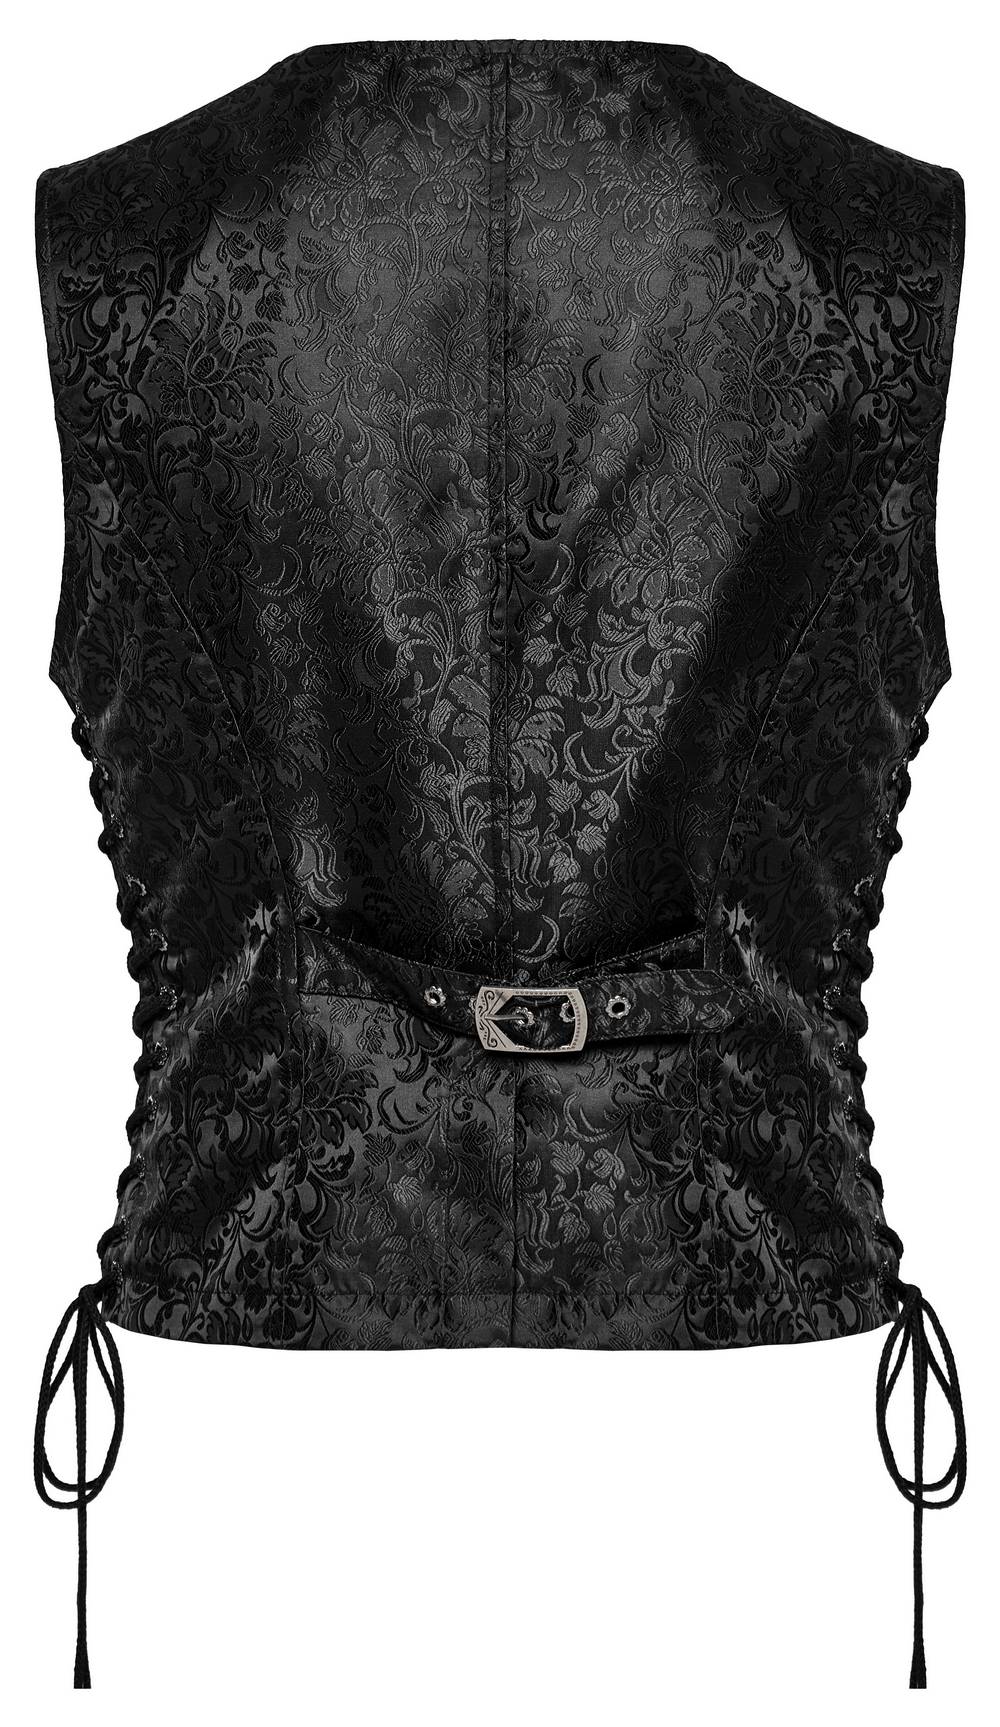 Gothic Floral Jacquard Waistcoat with Lacing on Sides